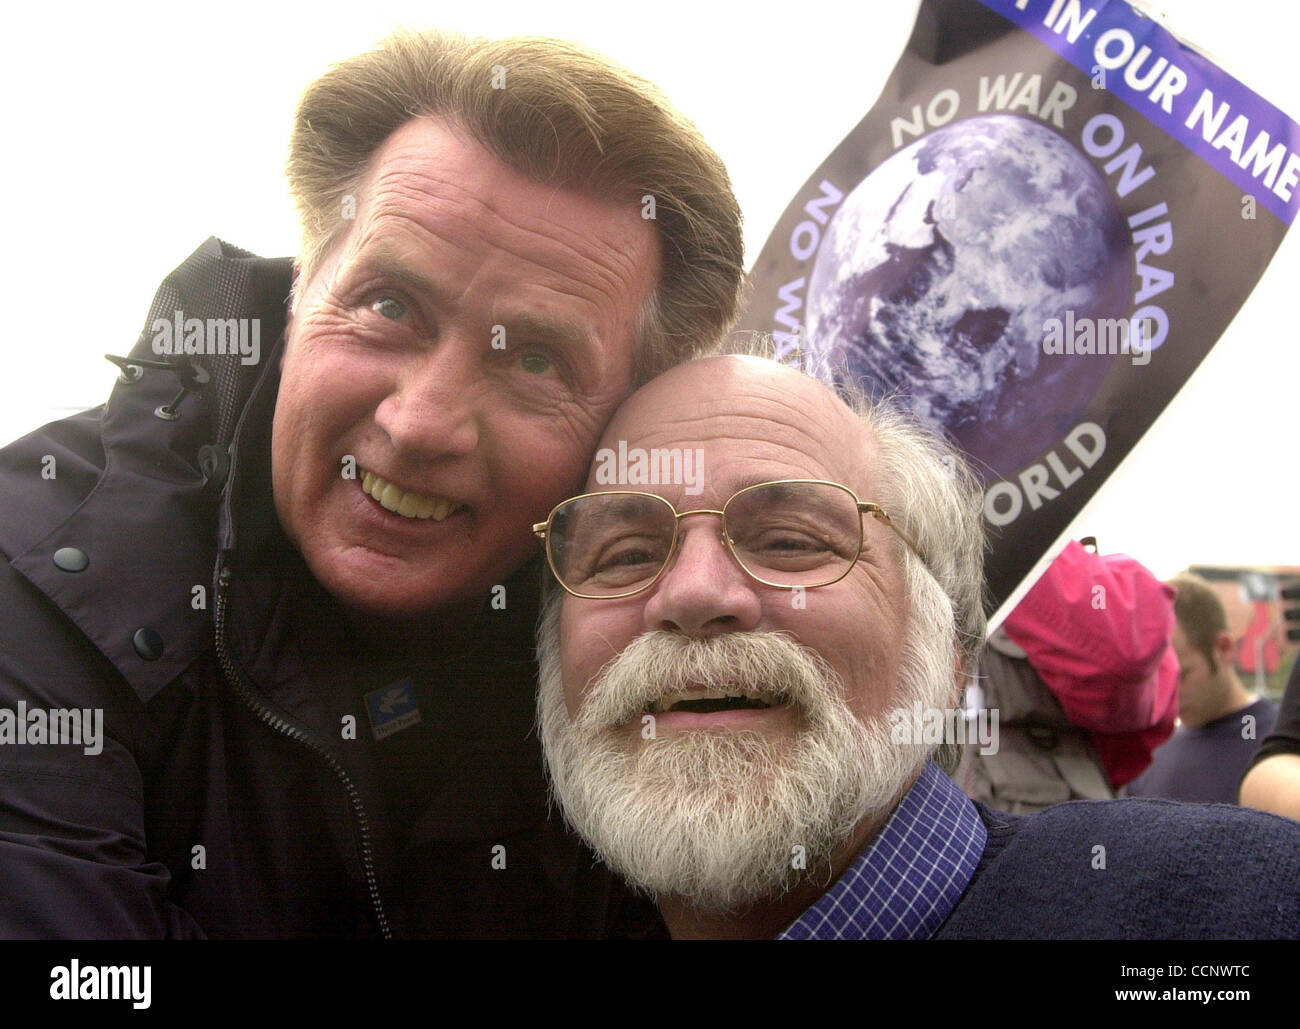 Feb 15, 2003; Hollywood, CA, USA; Television president Actor MARTIN SHEEN from NBC's West Wing meets Vietnam War Veteren Ron Kovich during an anti war rally in Hollywood. Stock Photo